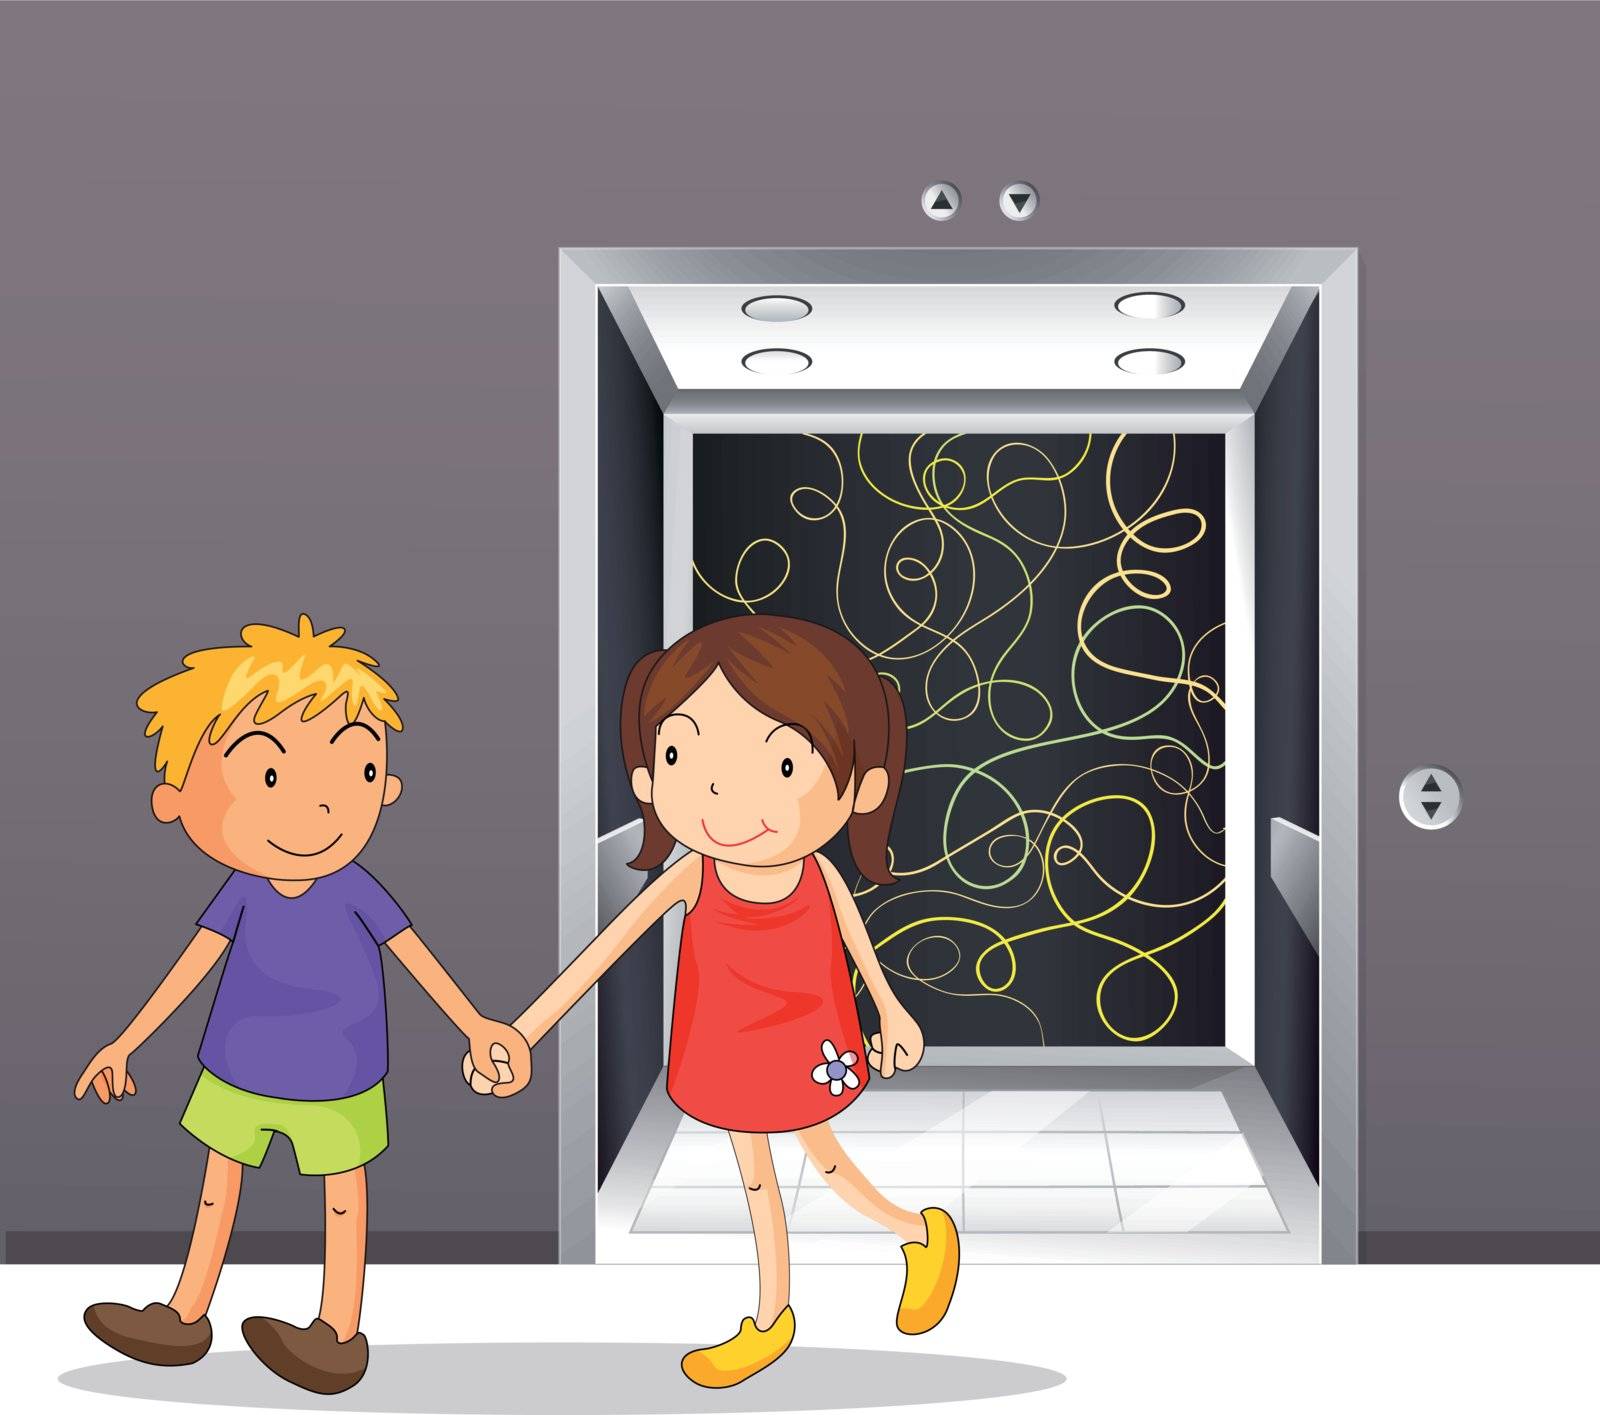 Illustration of a girl and a boy holding hands near the elevator